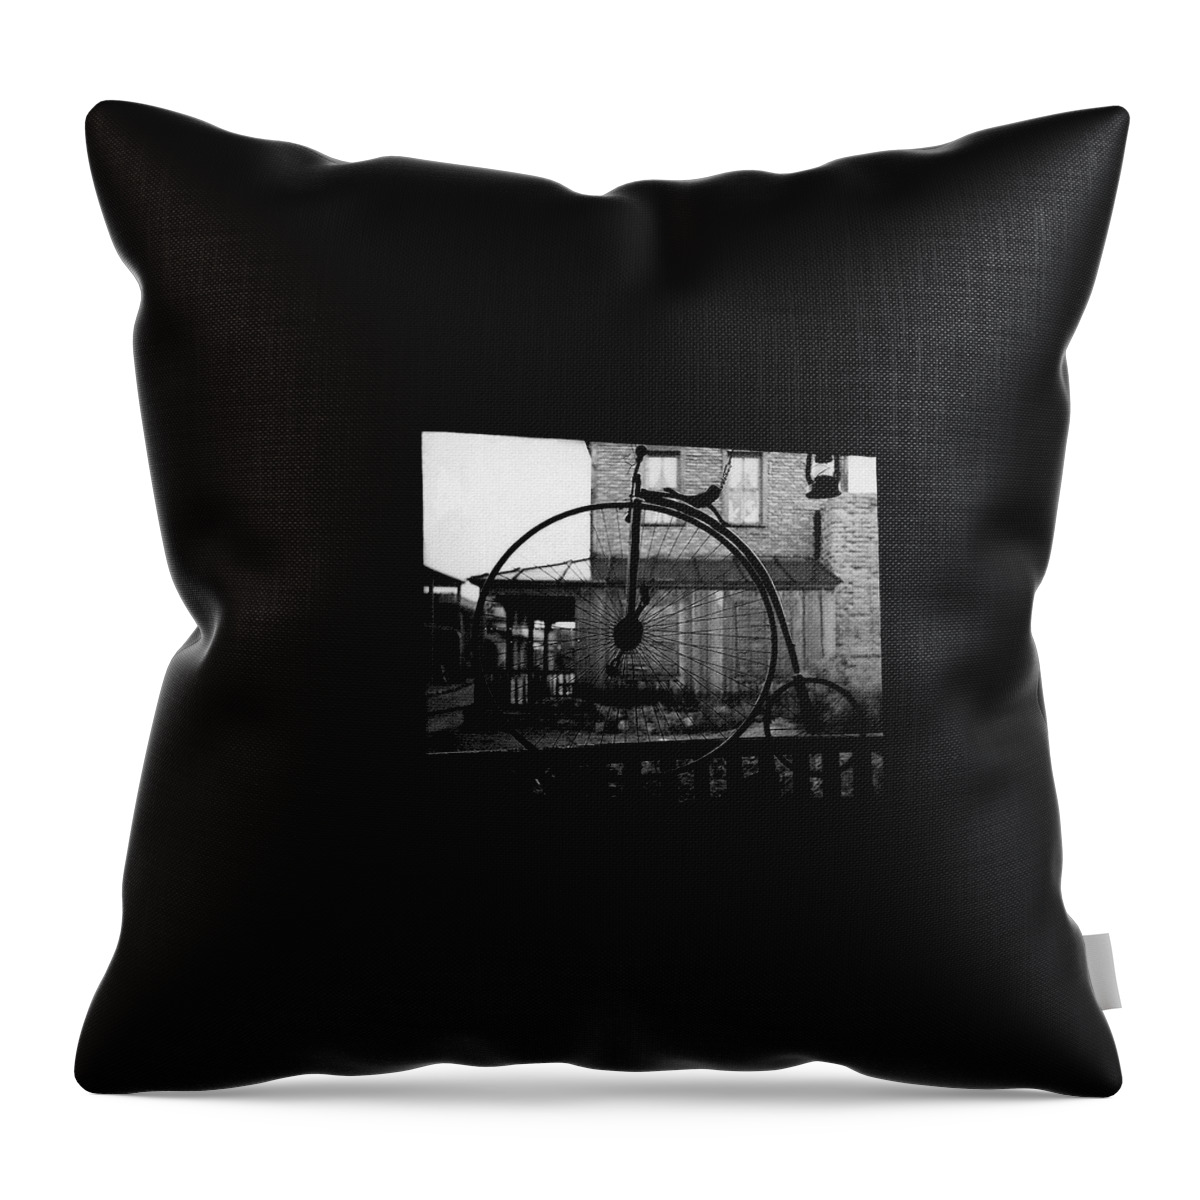 Film Homage Buster Keaton Our Hospitality 1923 Unicycle Old Tucson Arizona 1967-2008 Throw Pillow featuring the photograph Film Homage Buster Keaton Our Hospitality 1923 Unicycle Old Tucson Arizona 1967-2008 #1 by David Lee Guss